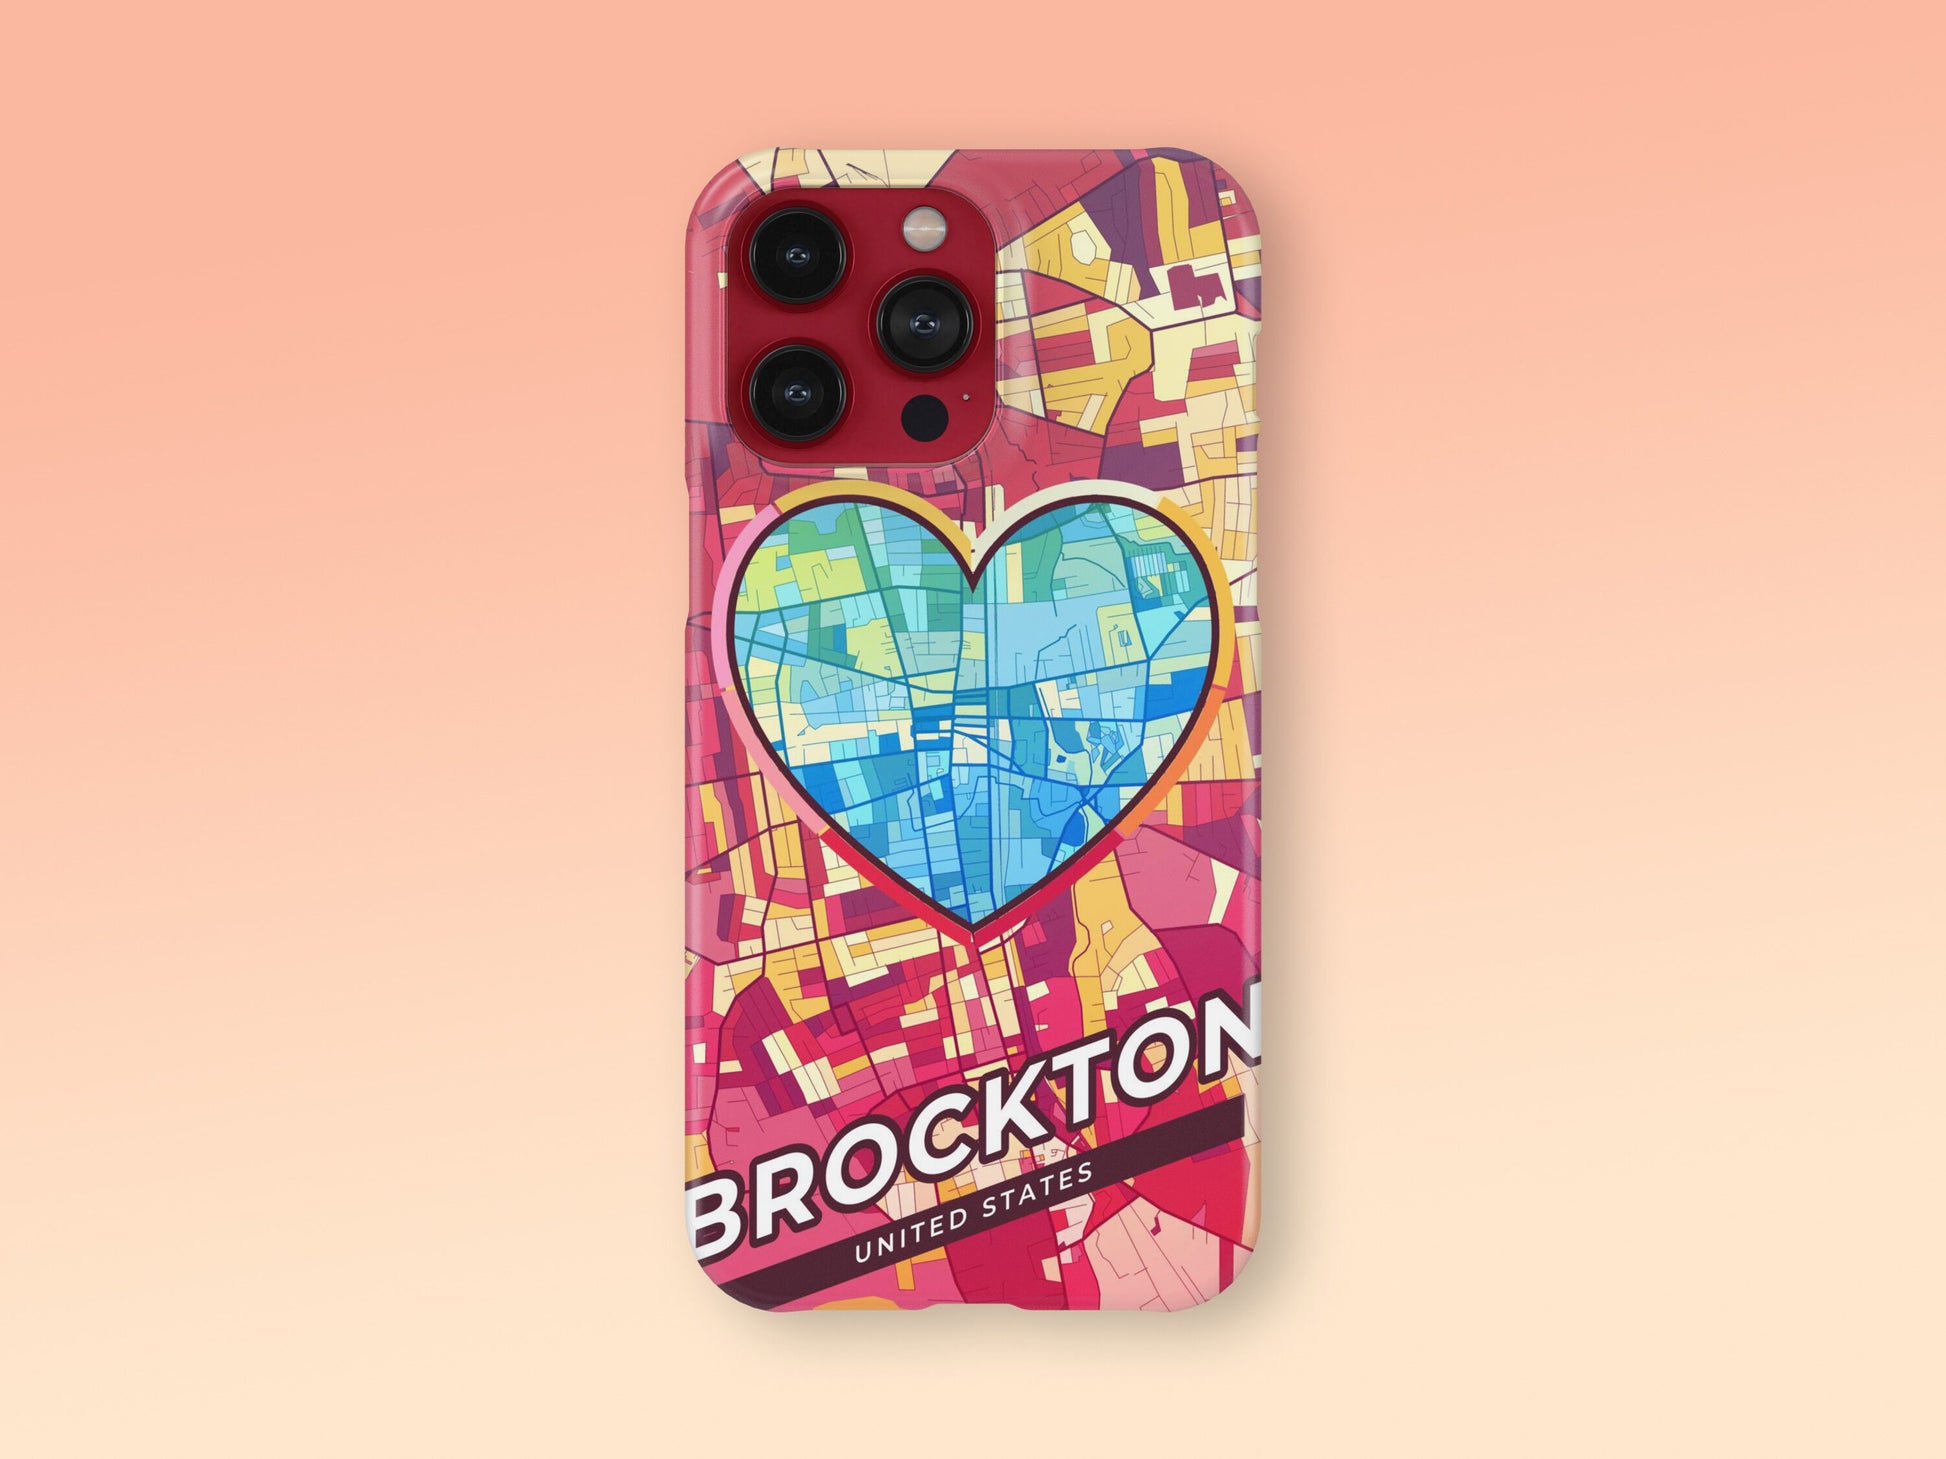 Brockton Massachusetts slim phone case with colorful icon. Birthday, wedding or housewarming gift. Couple match cases. 2